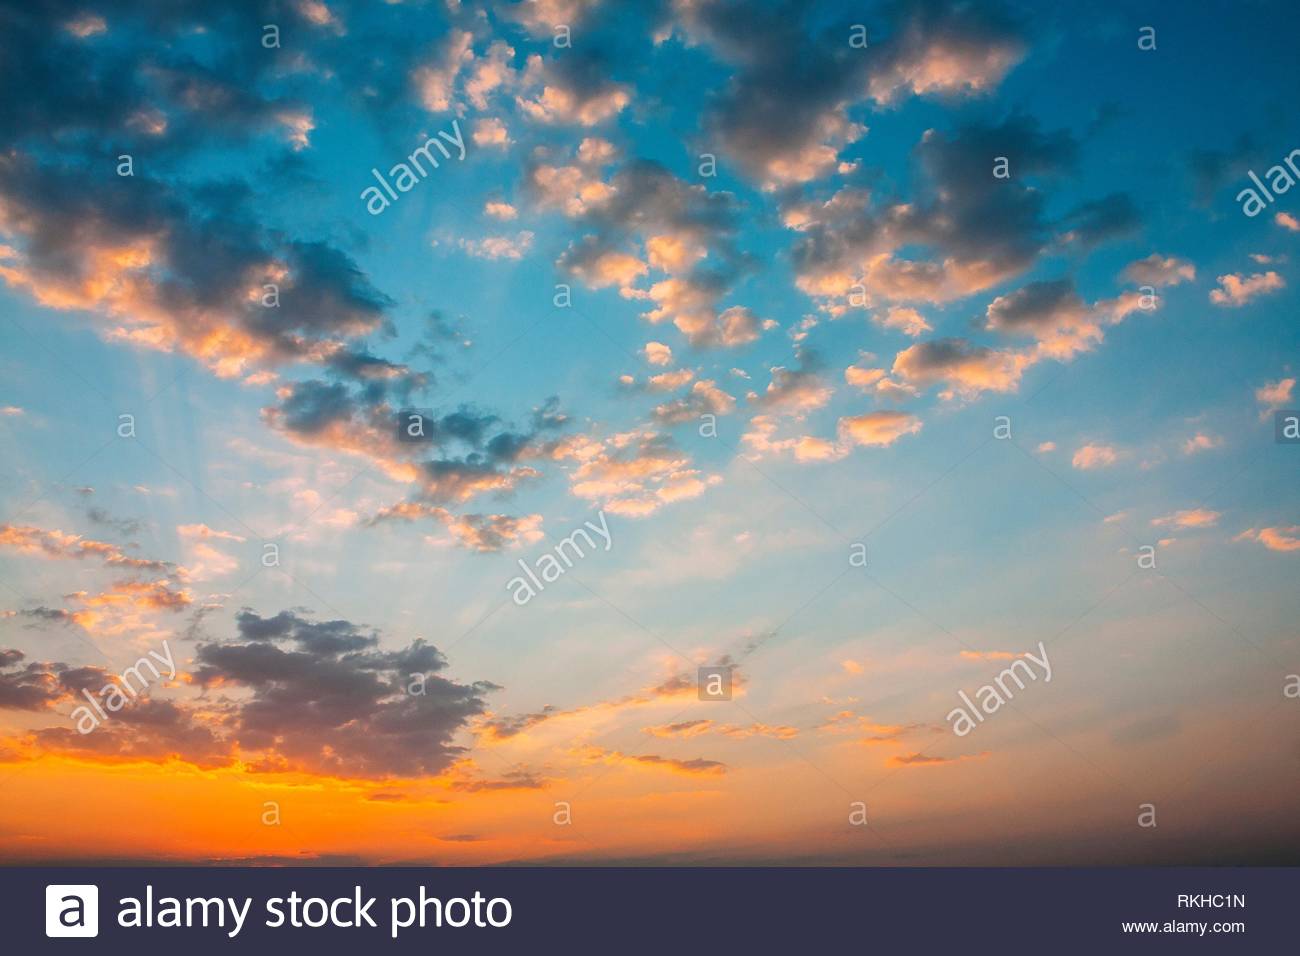 Sunset Sunrise Sky Background Natural Bright Dramatic Sky In 1300x956